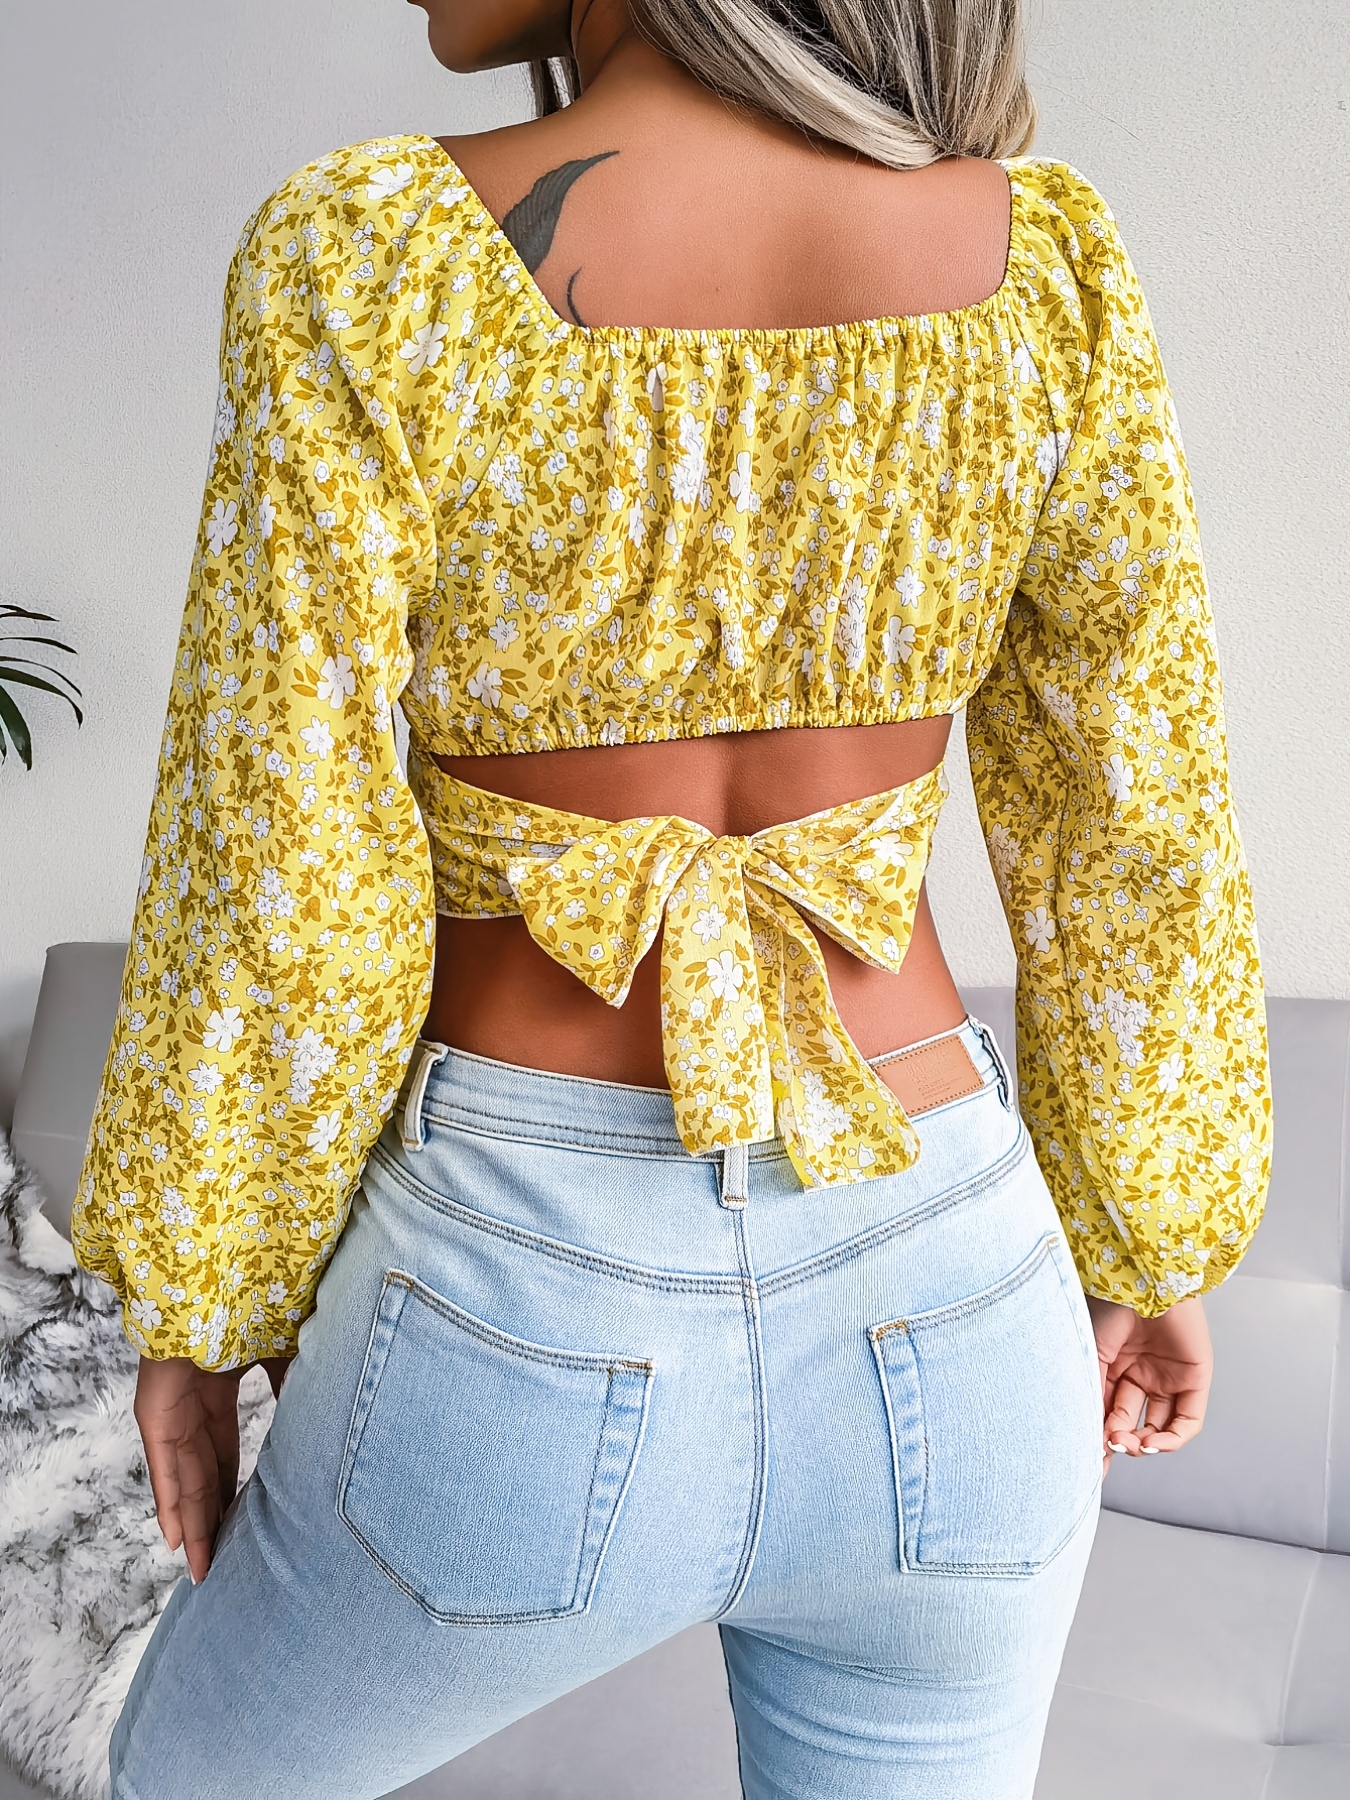 Women's Bohemian Summer Top - Elbow Length Sleeves / Floral Trim / Yellow